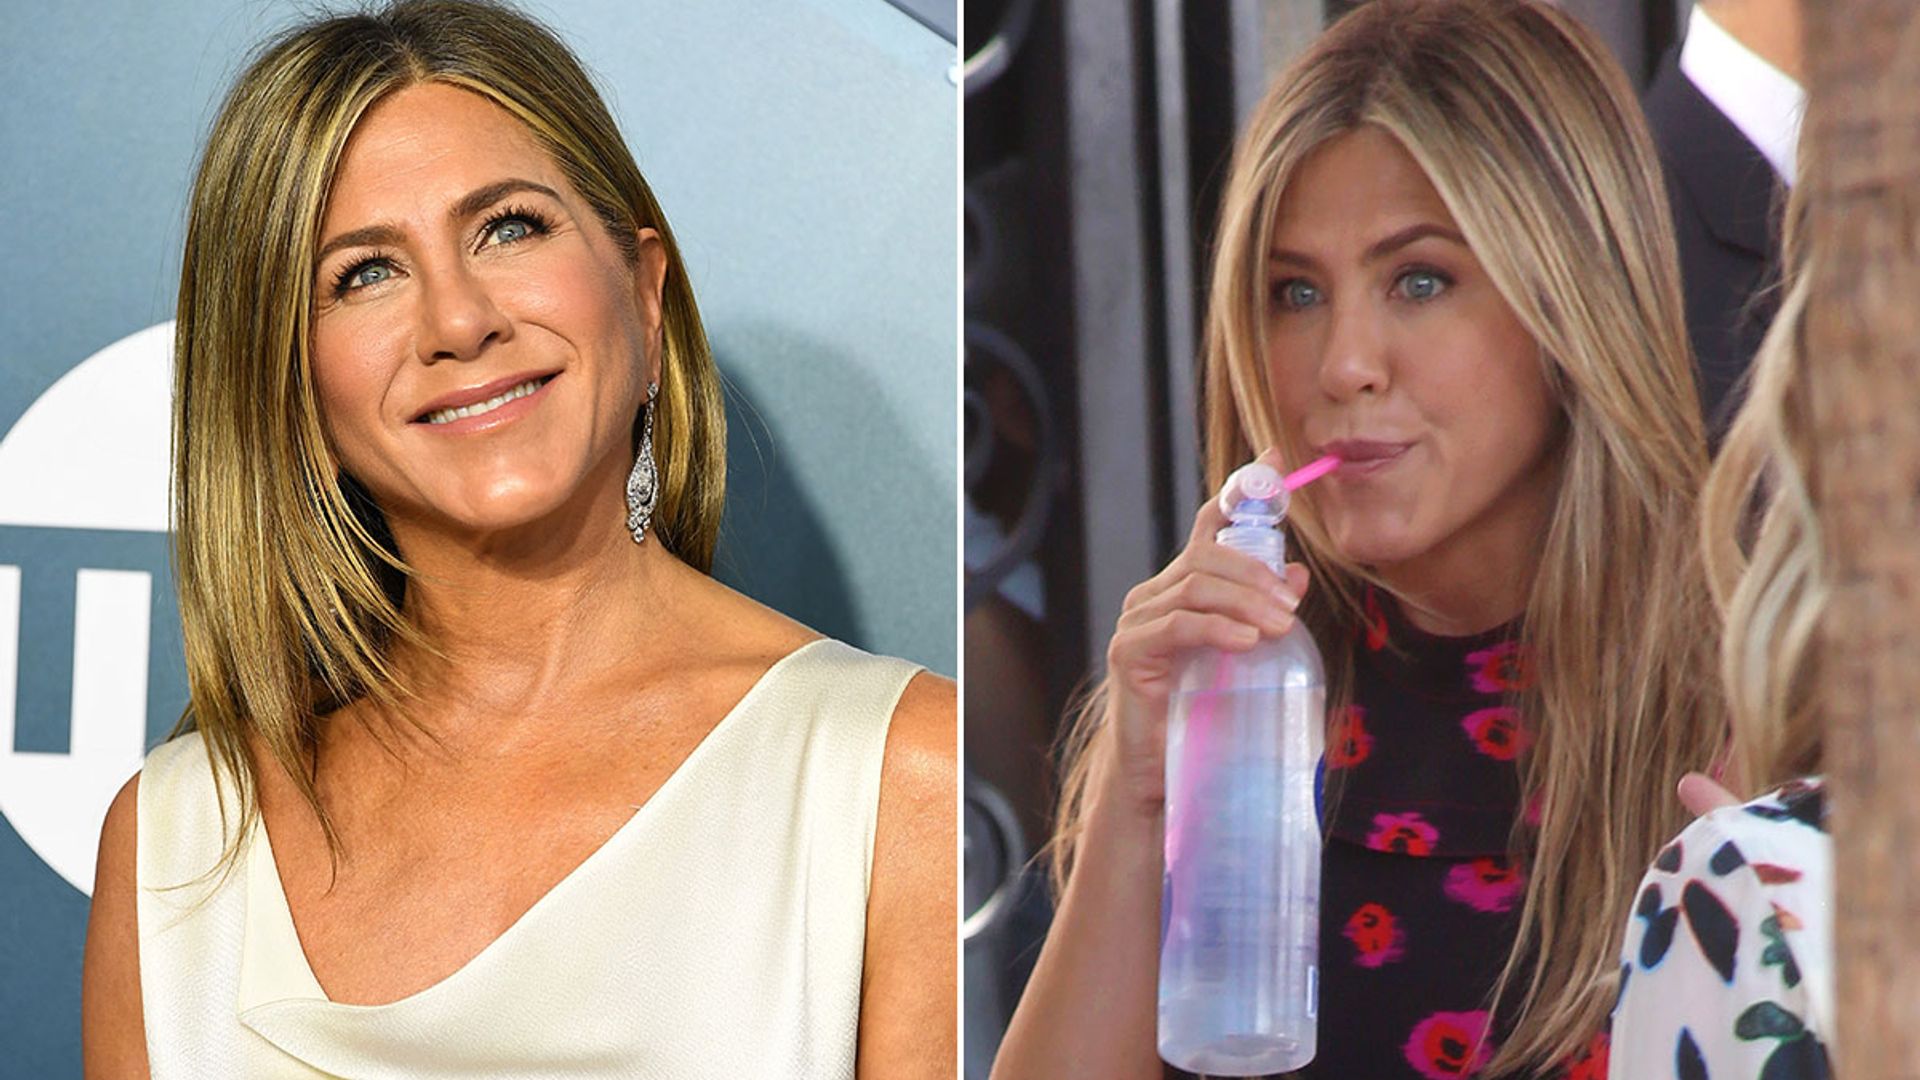 Jennifer Aniston's daily diet revealed: what the actress eats for breakfast, lunch and dinner